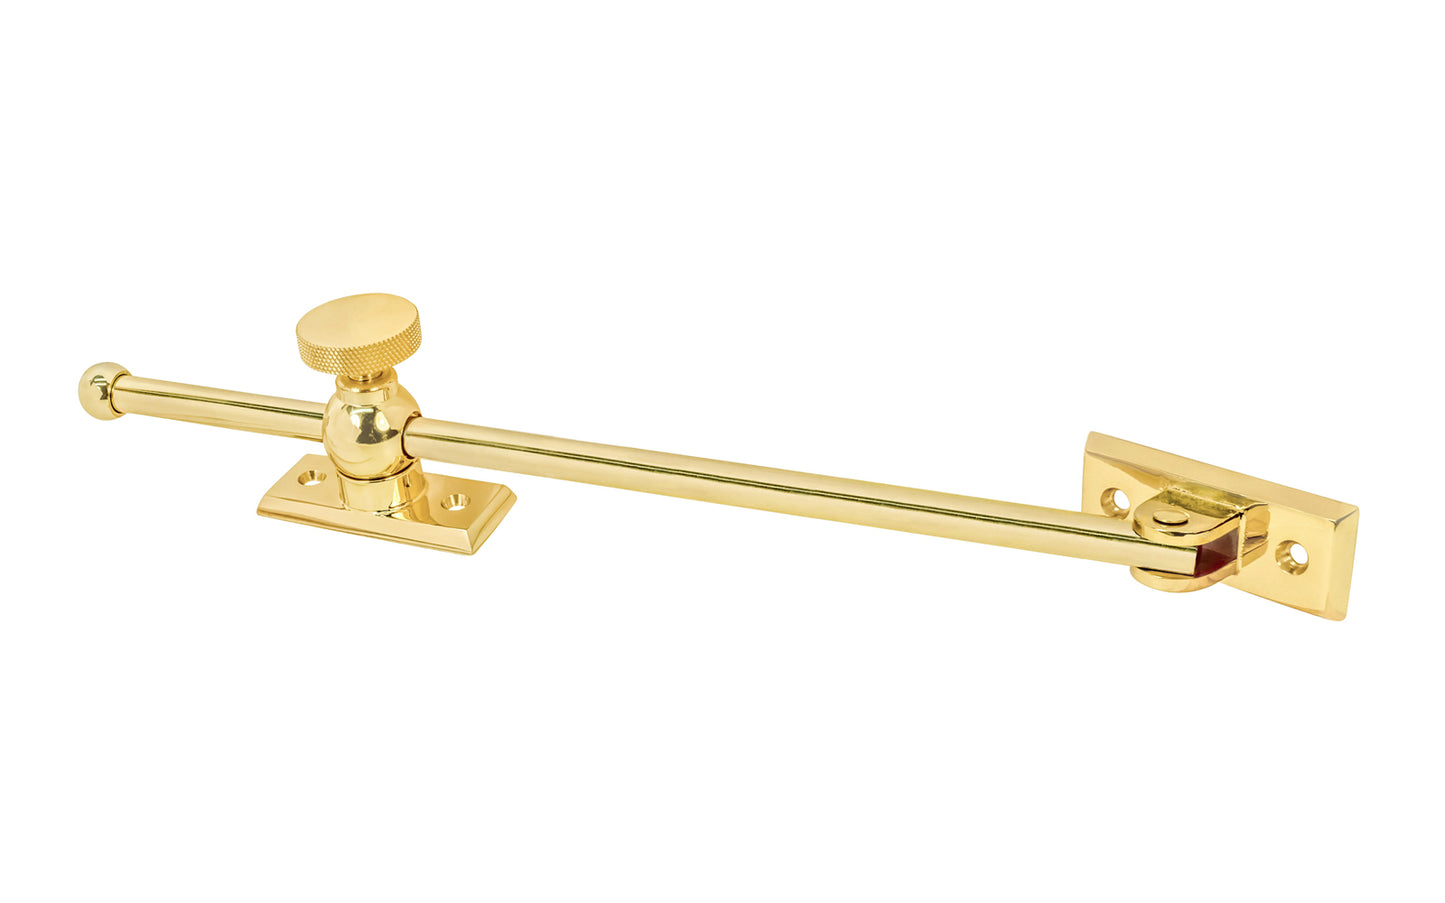 Vintage-style Classic & Premium Solid Brass Casement Adjuster Stay ~ 12" Length. For securing outswing casement windows. It has a durable pivot turn with a knurled knob for smooth & secure operation. Lacquered Brass Finish